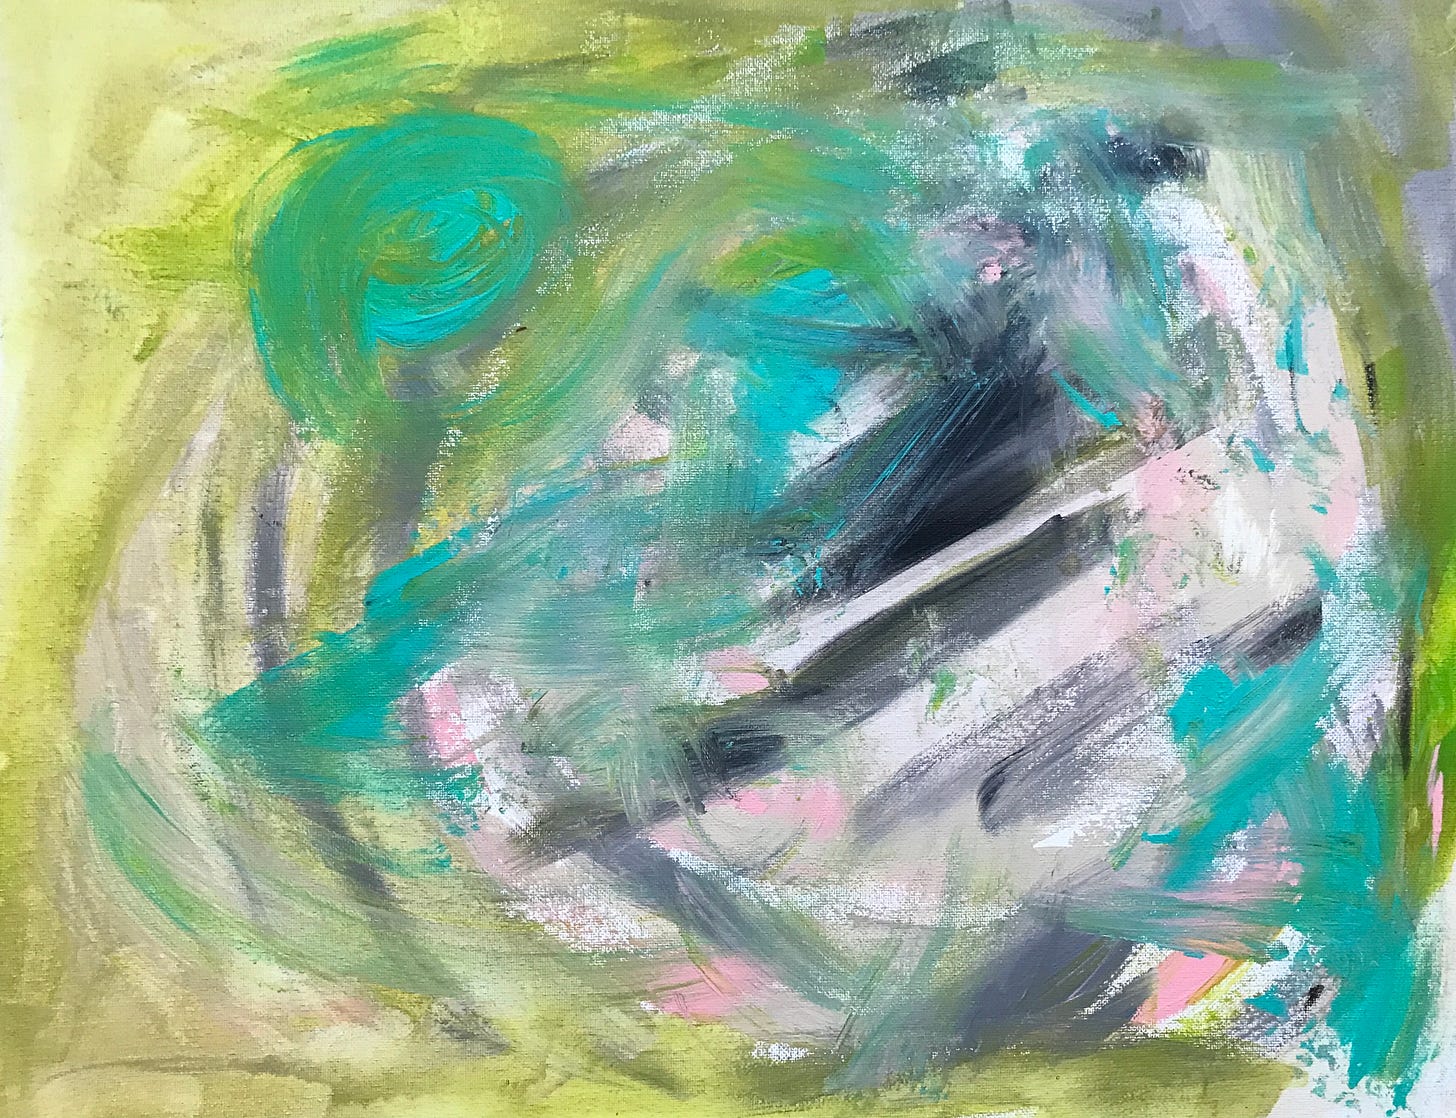 Abstract painting of brush swaths, diagonal lines and circles in sour green, teal, black, pale pink